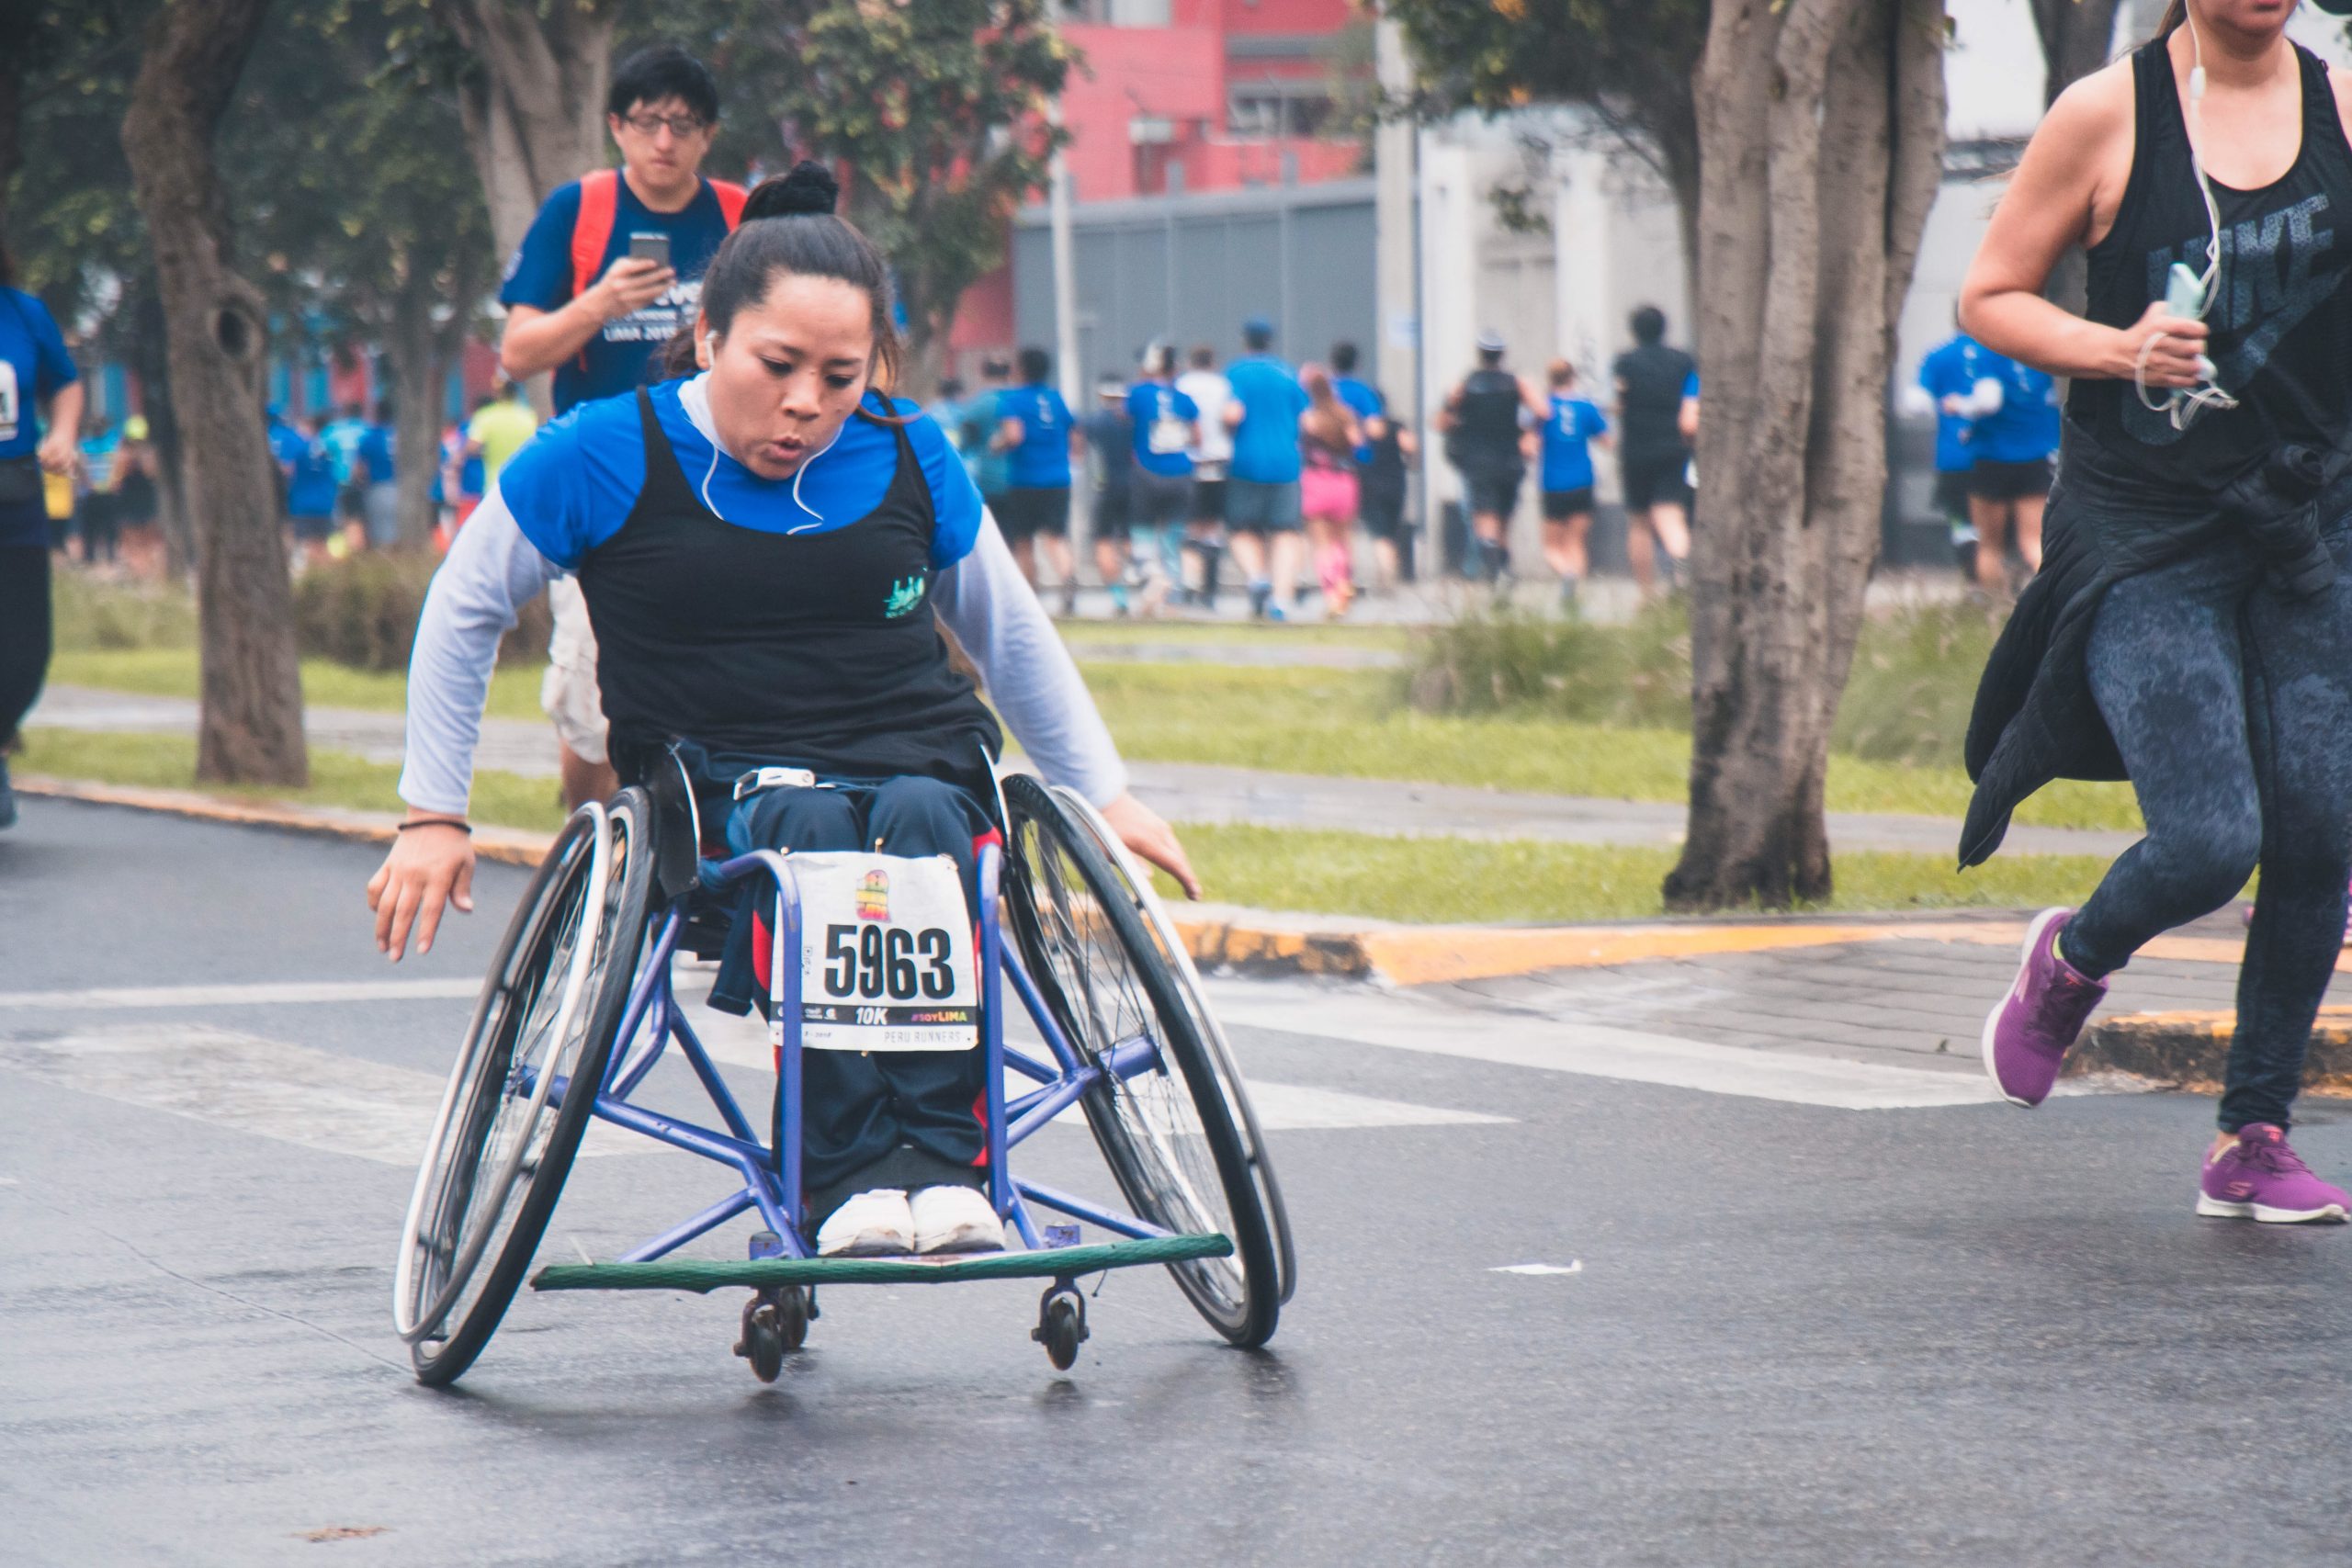 Image shows a woman in a wheelchair taking part in a marathon.